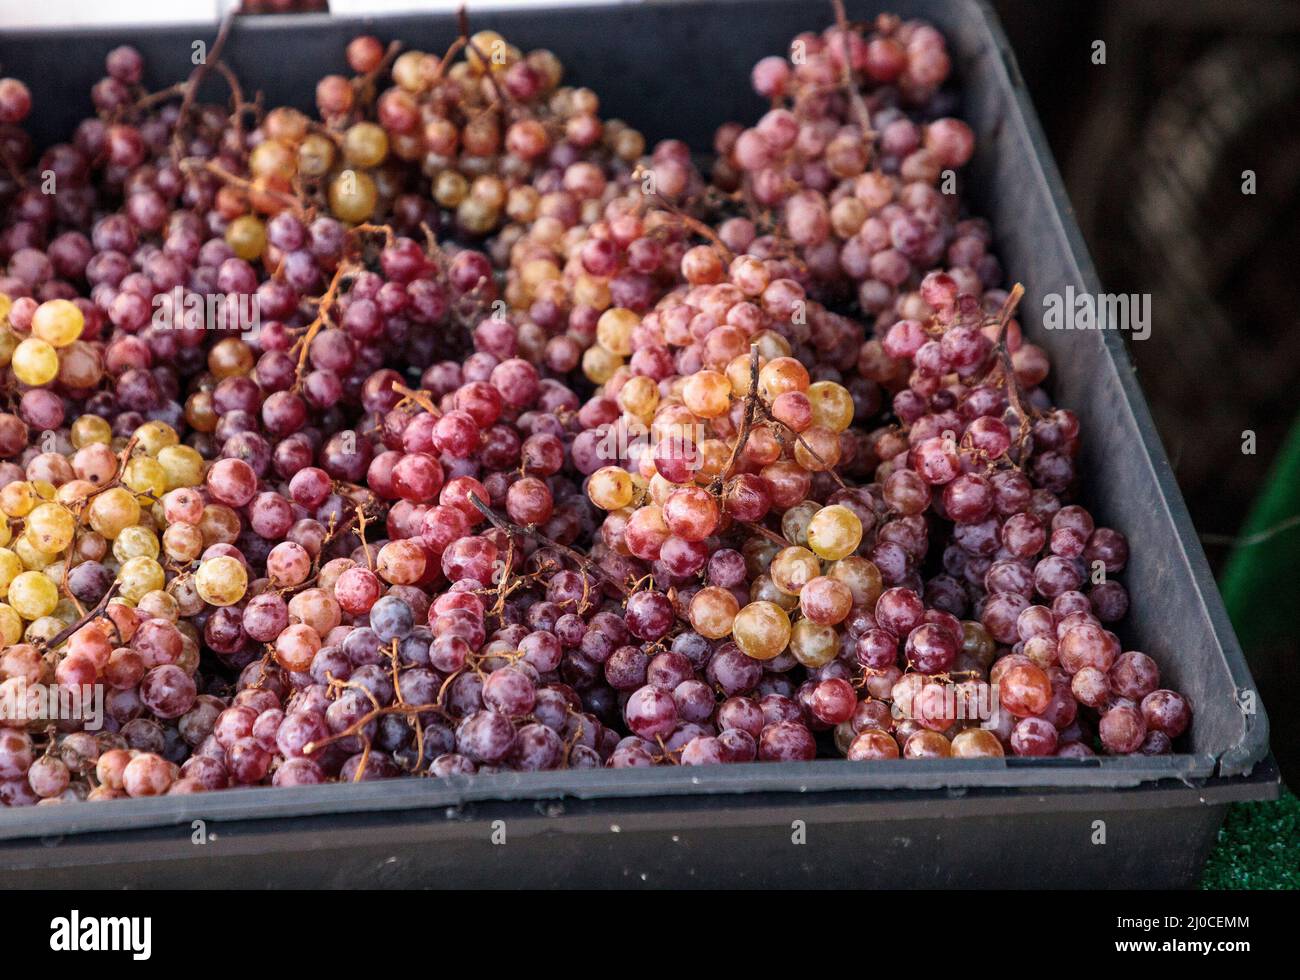 Bunches of Red flame grapes in a basket sold at a farmers market Stock Photo